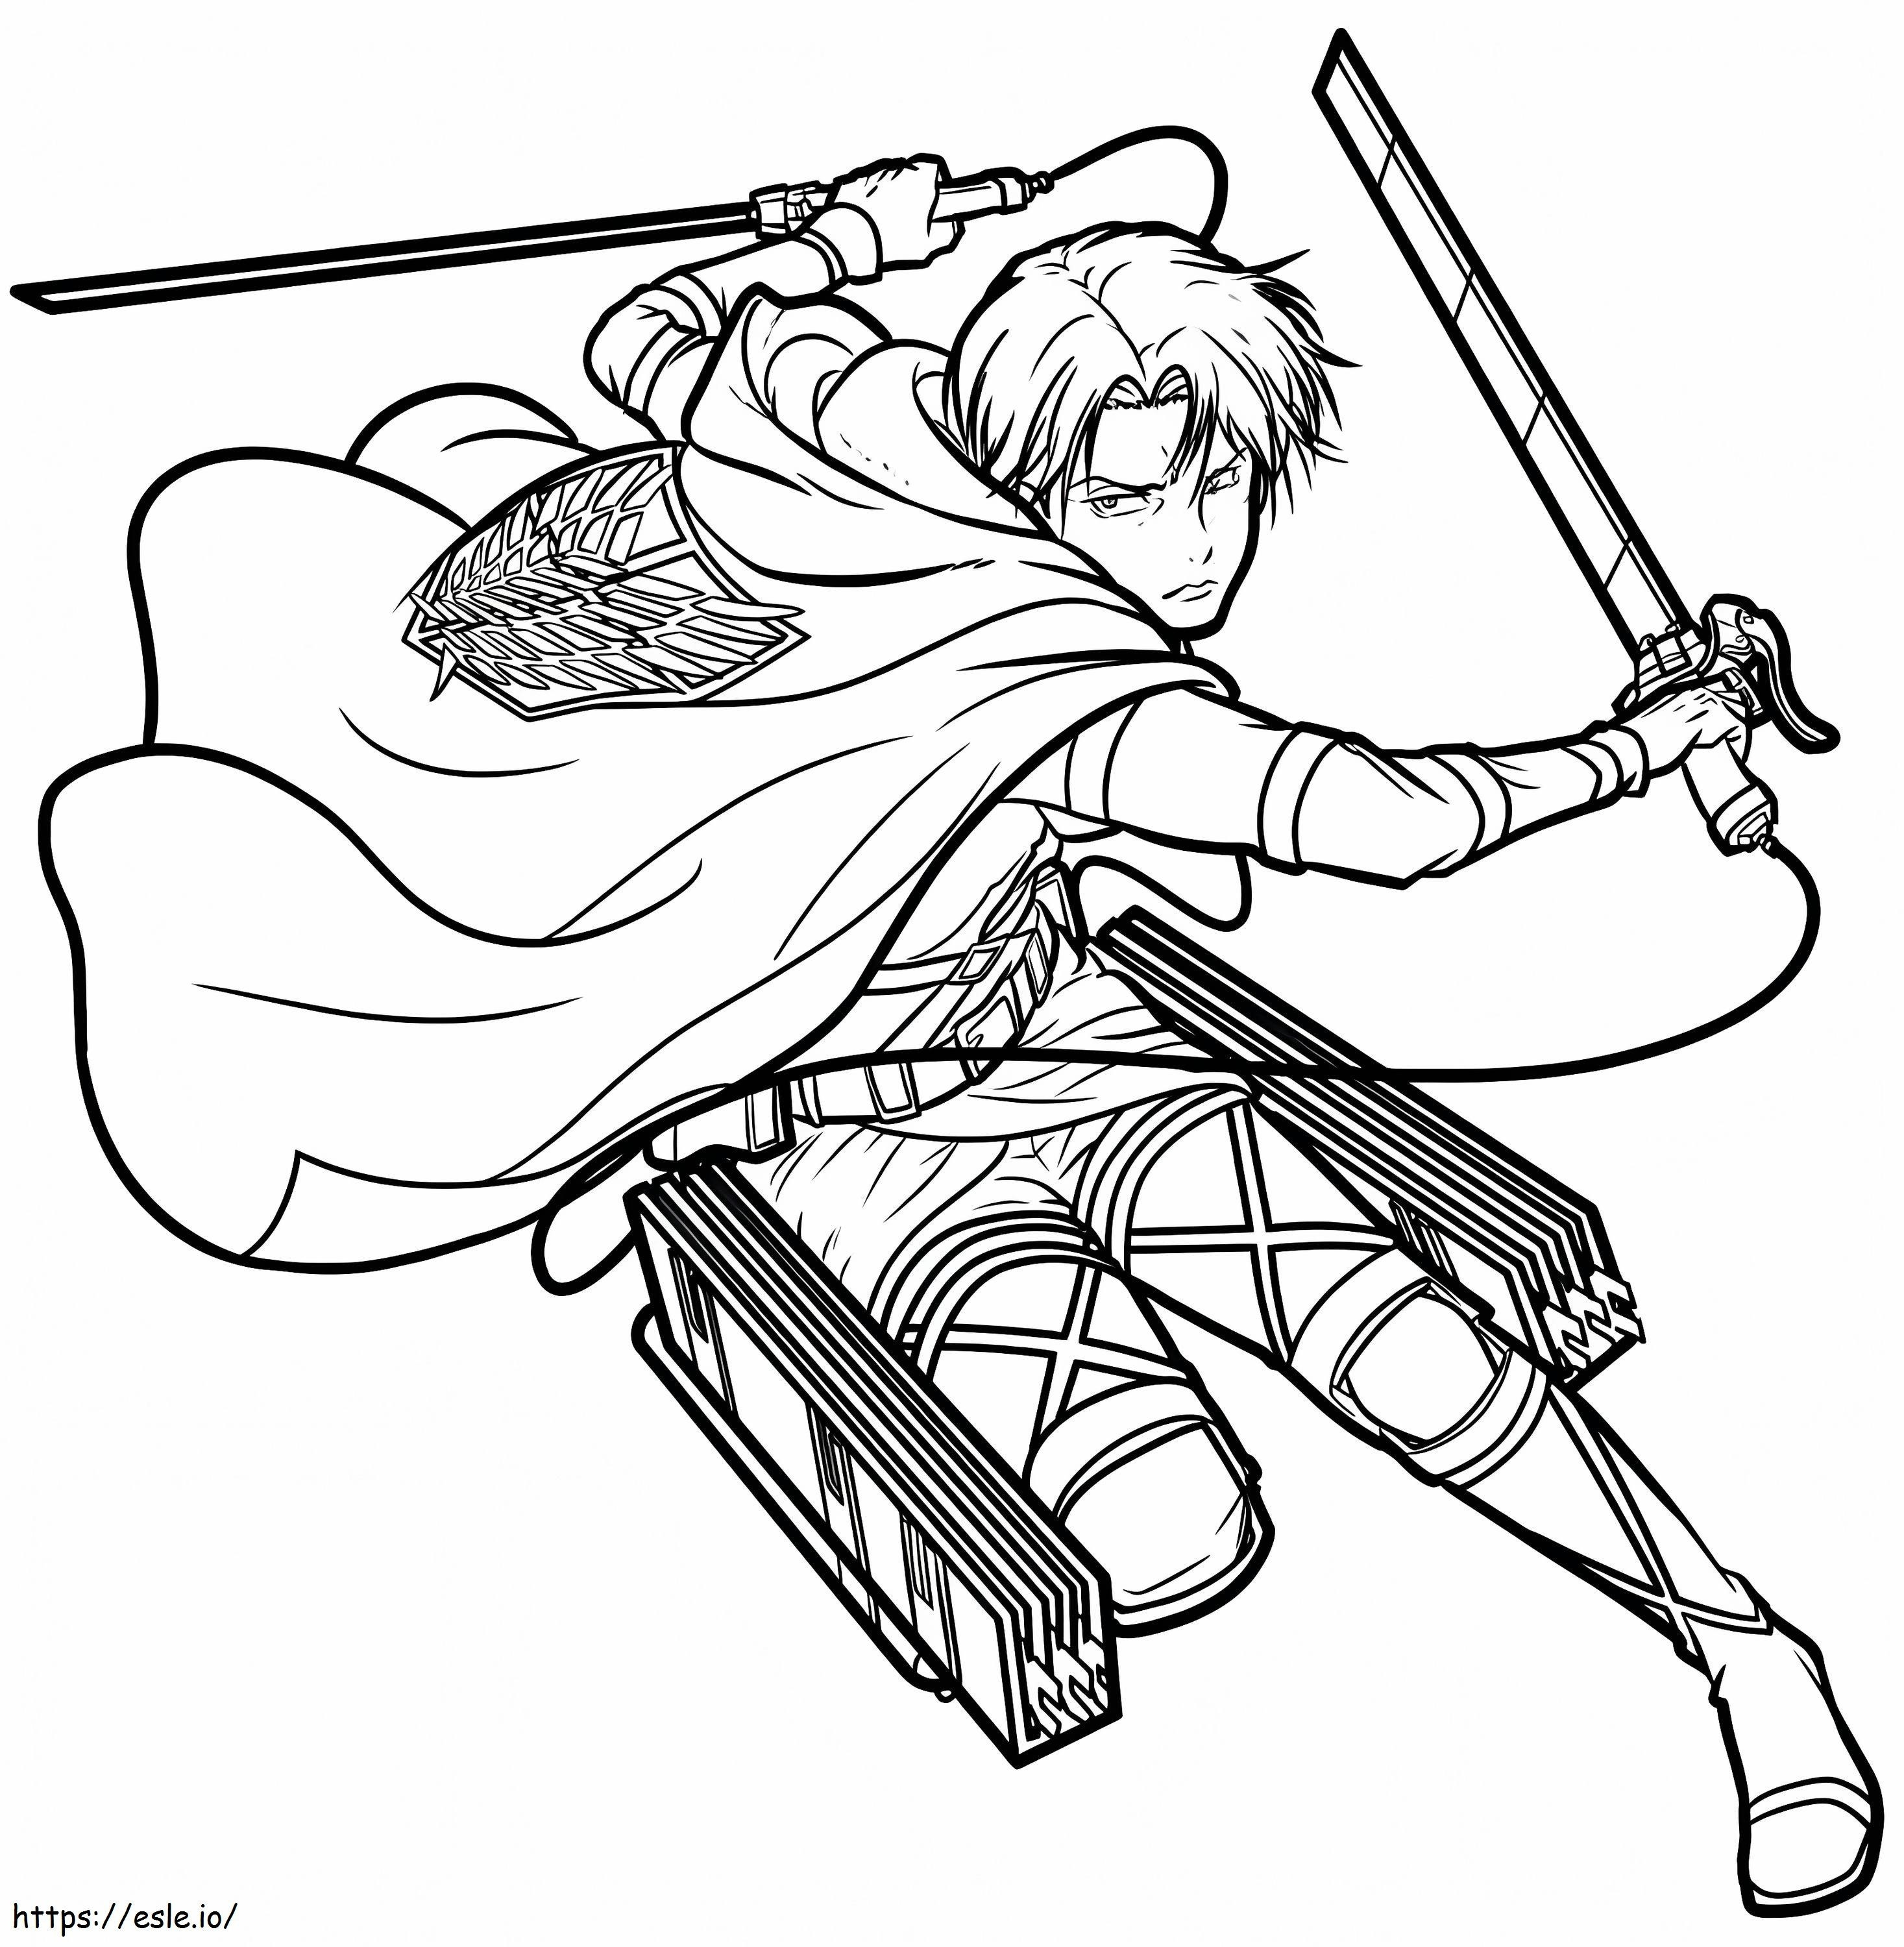 Levi Is Strong coloring page